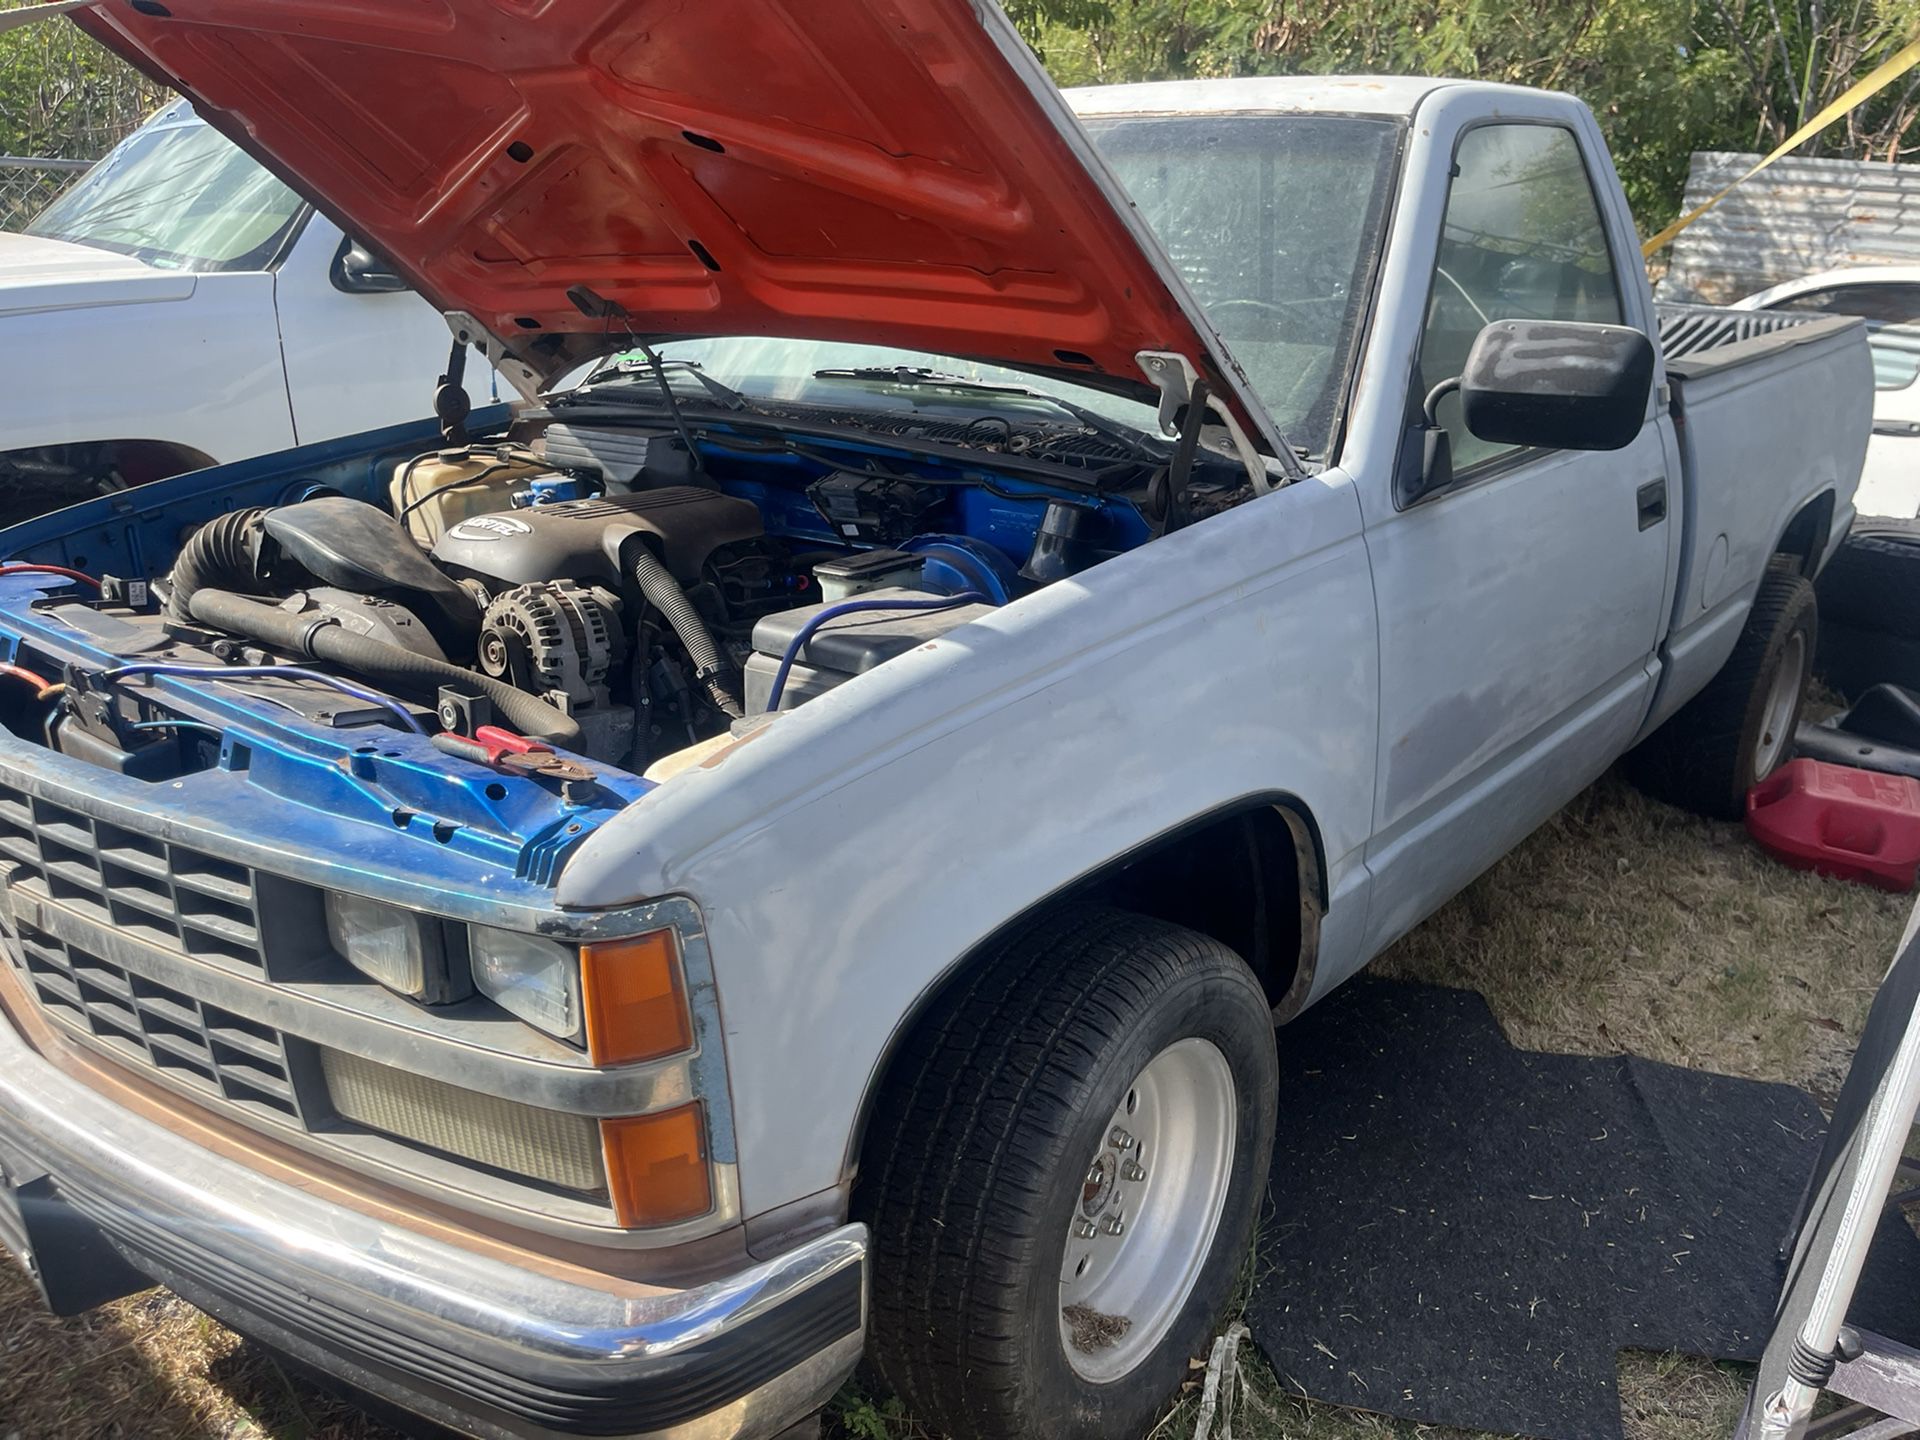 LS swapped Obs Chevy Project 